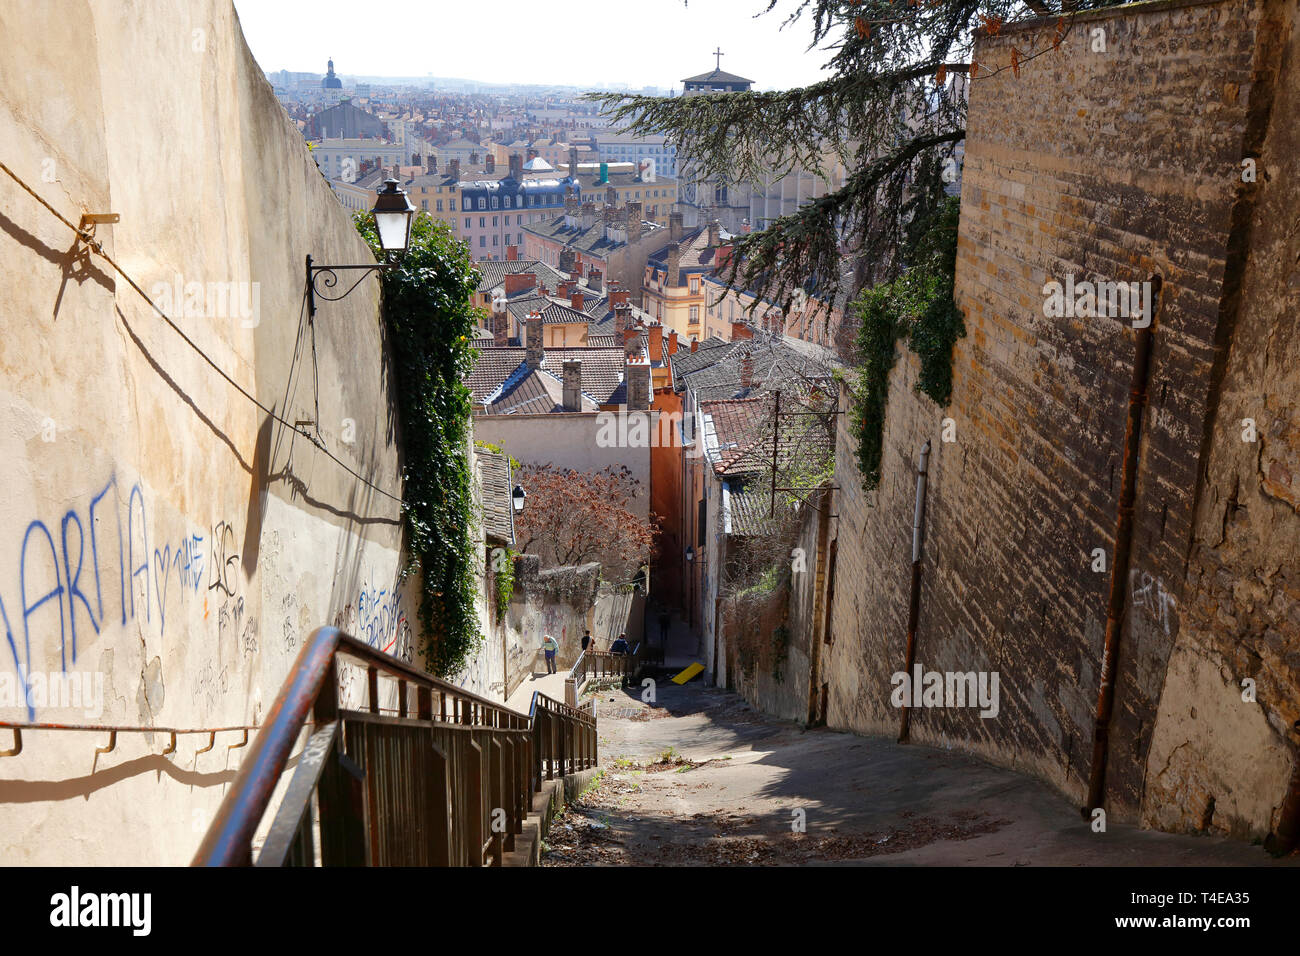 Steep hills, and countless steps common in the 'Old City' Vieux Lyon, Lyon, France Stock Photo